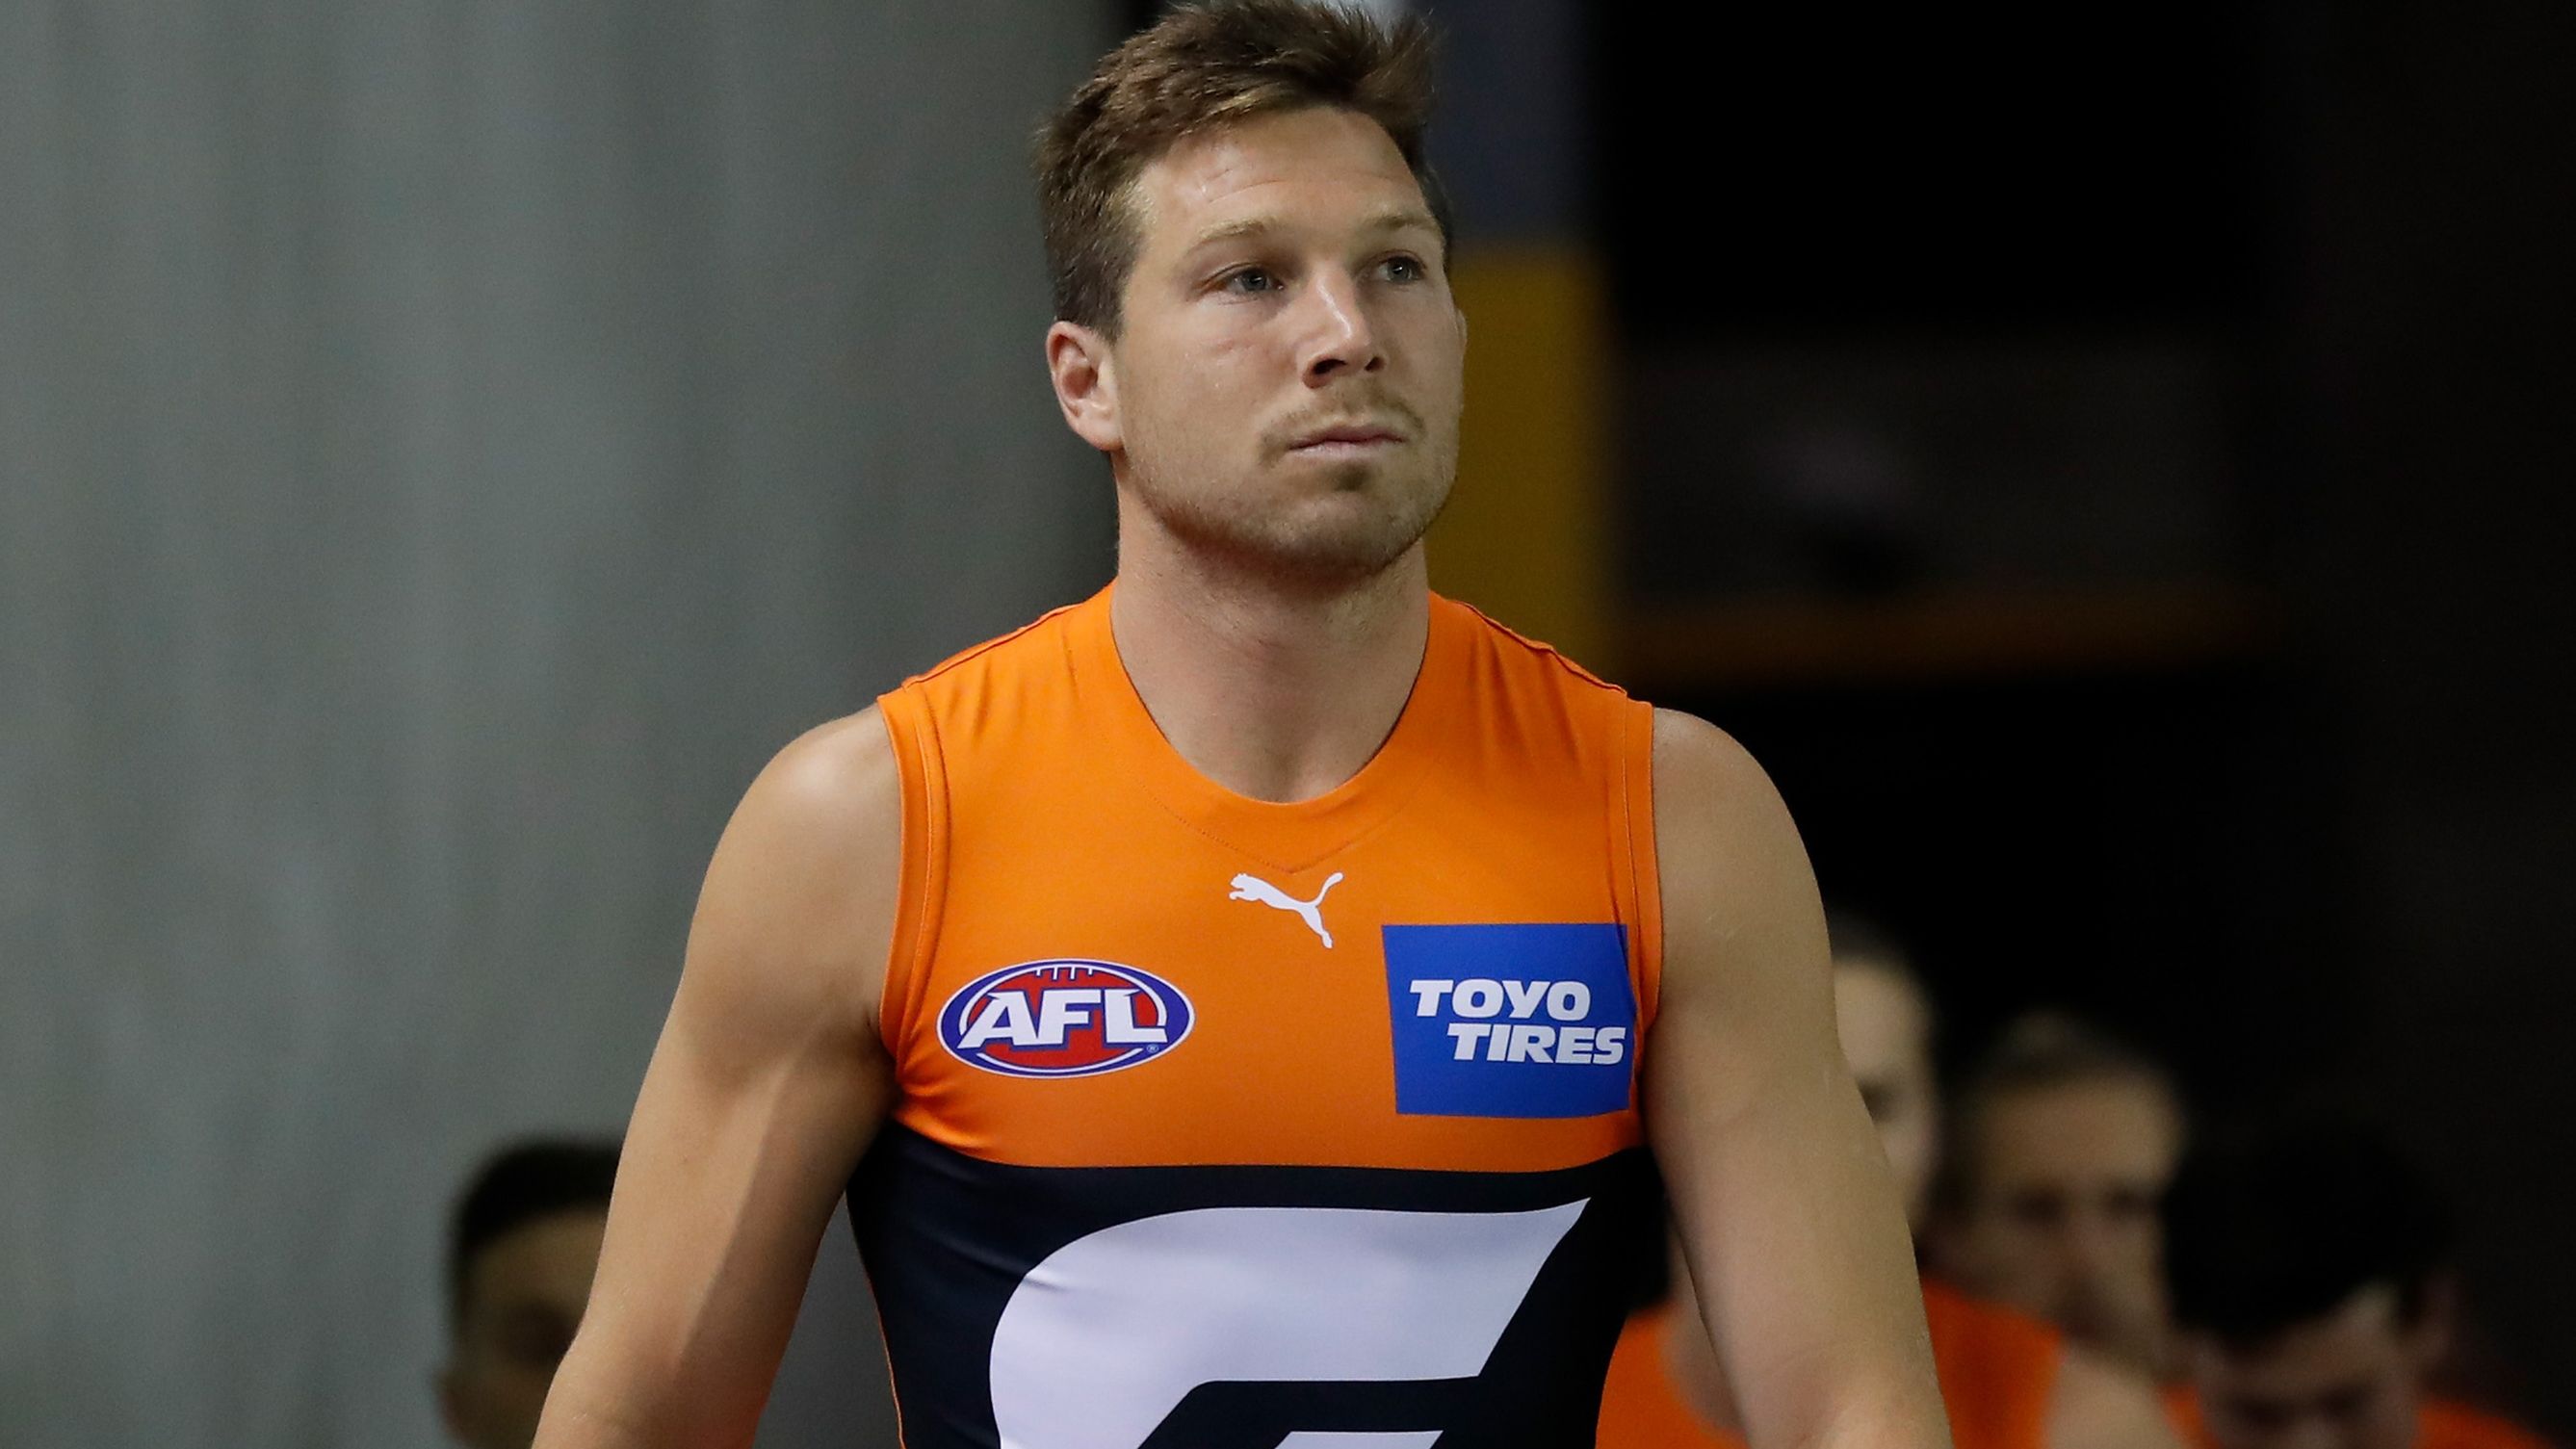 GWS Giants star Toby Greene has suspension for umpire touch increased from 3 to 6 weeks